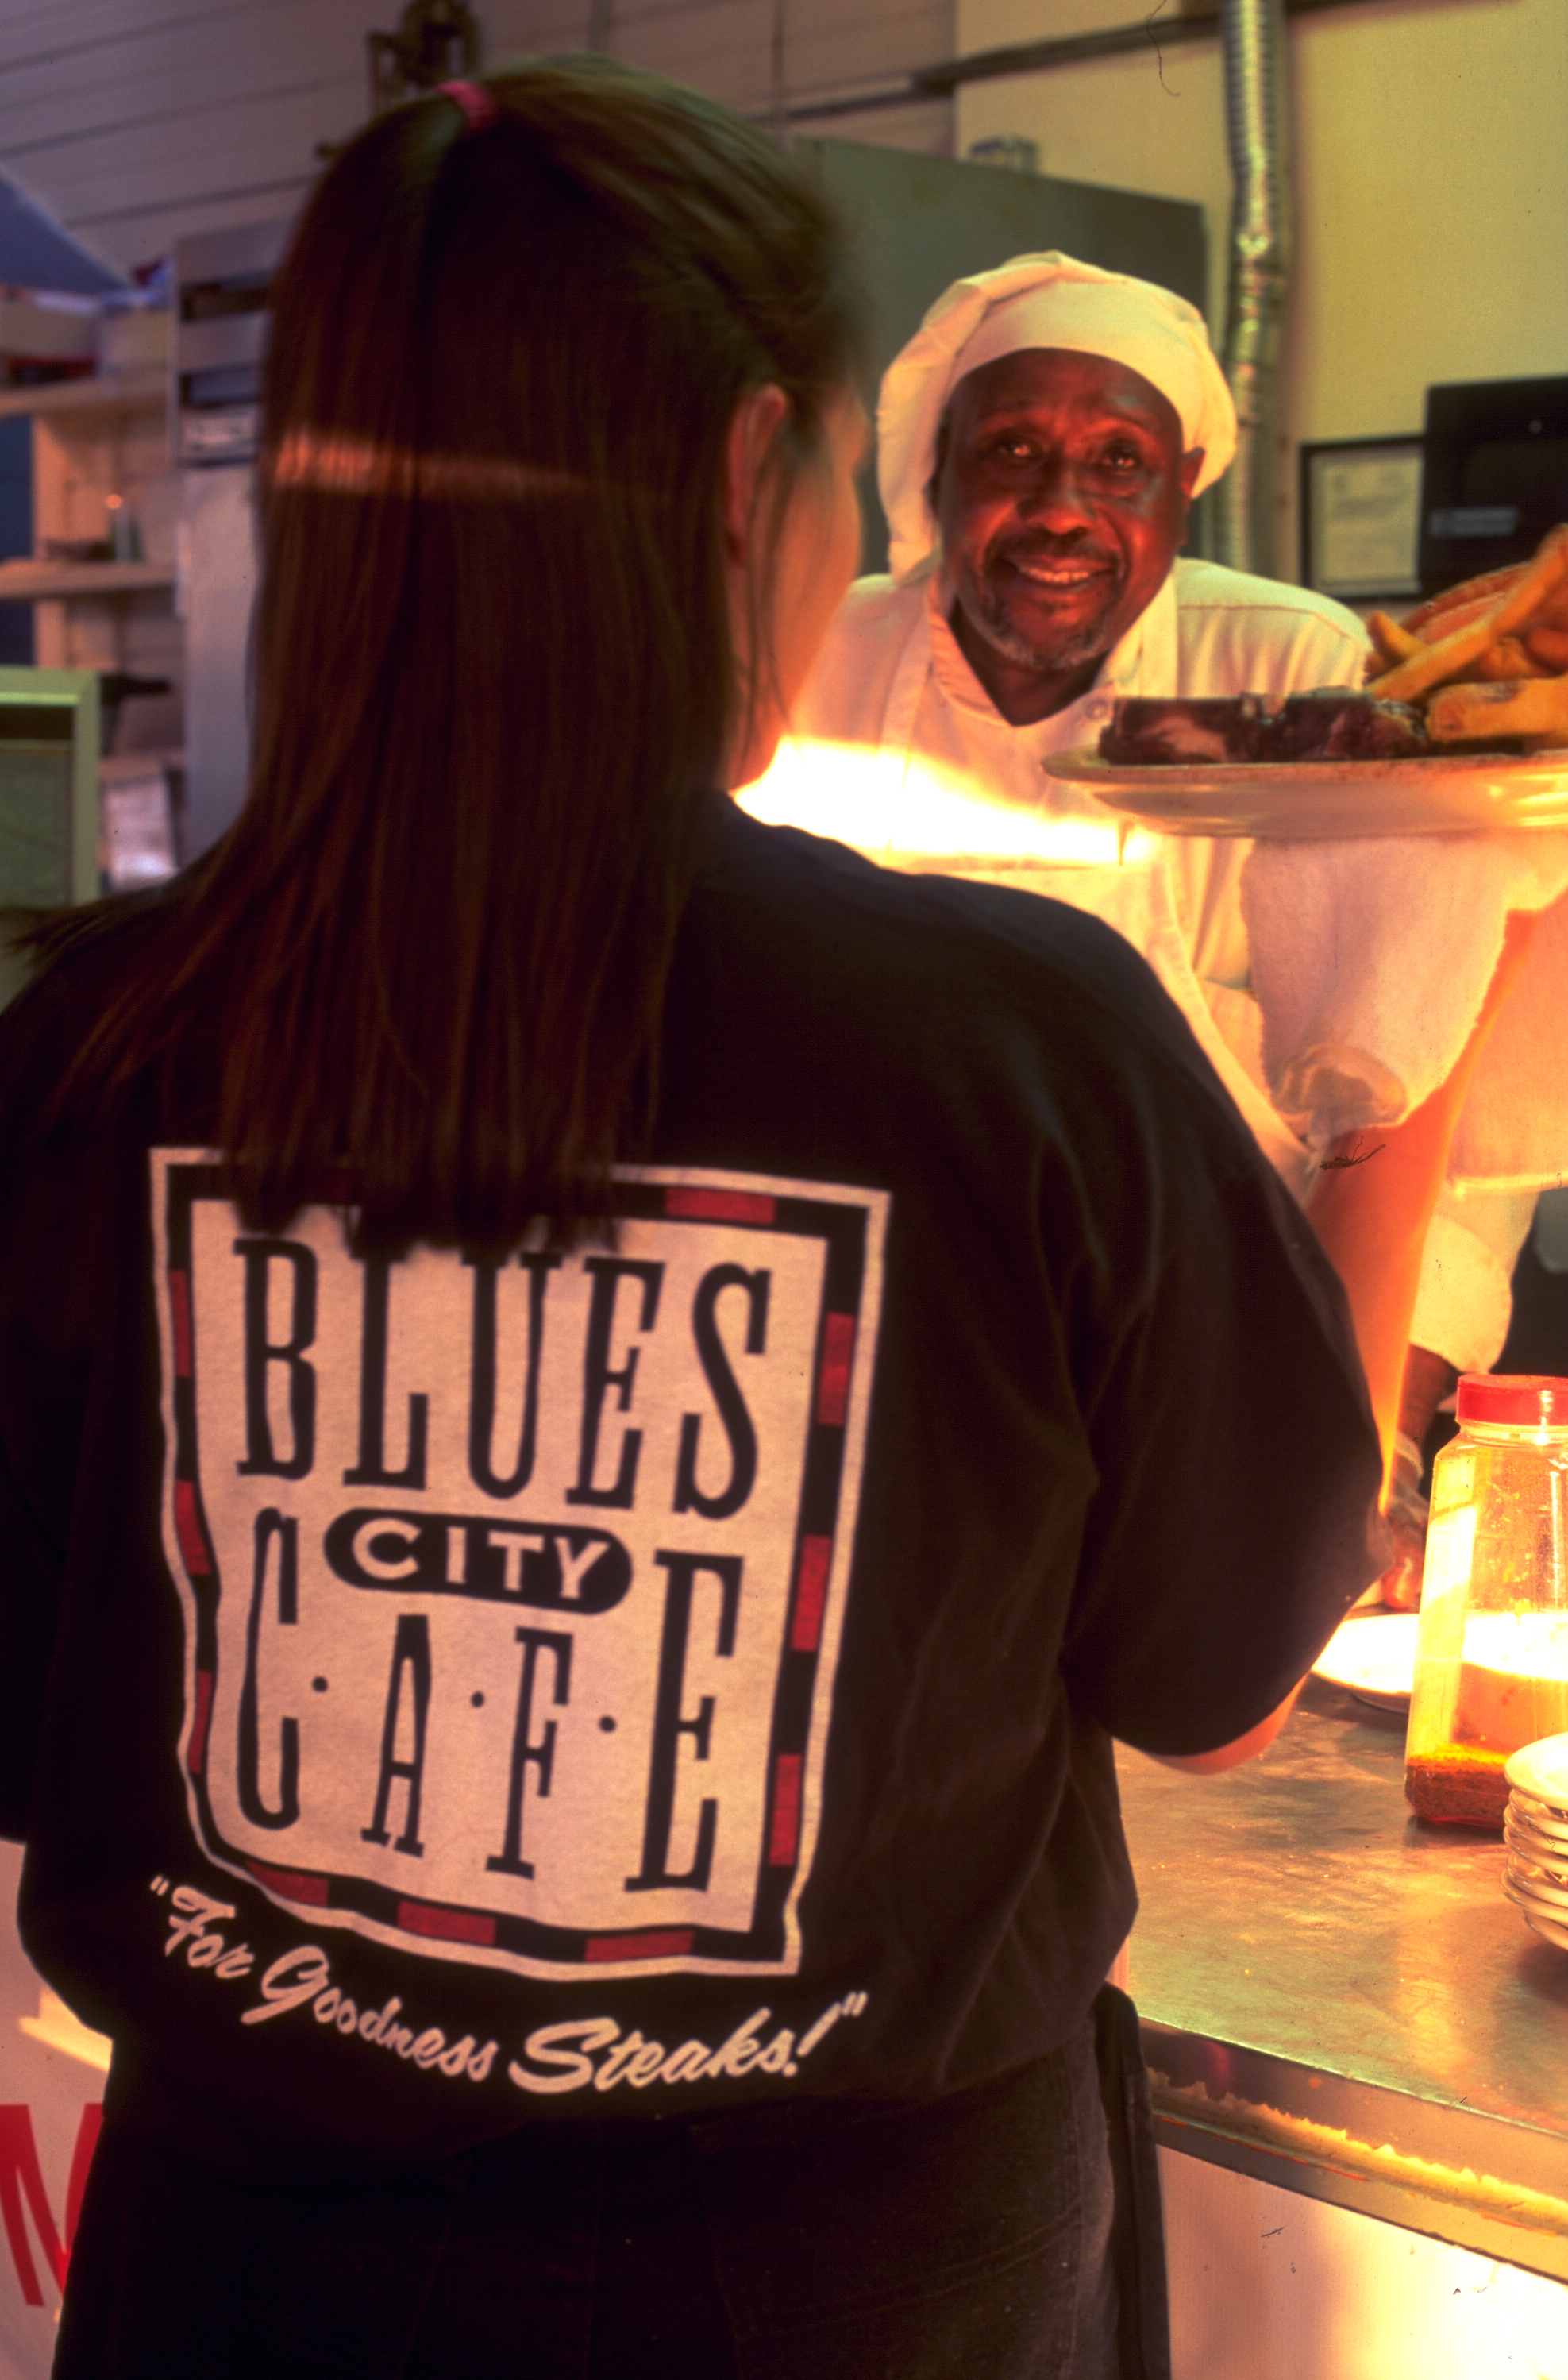  The late, great Bonnie Mack, RIP  Blues City Cafe logo tee  Branding creative and design by Chuck Mitchell  Beale Street Memphis, Tennessee 